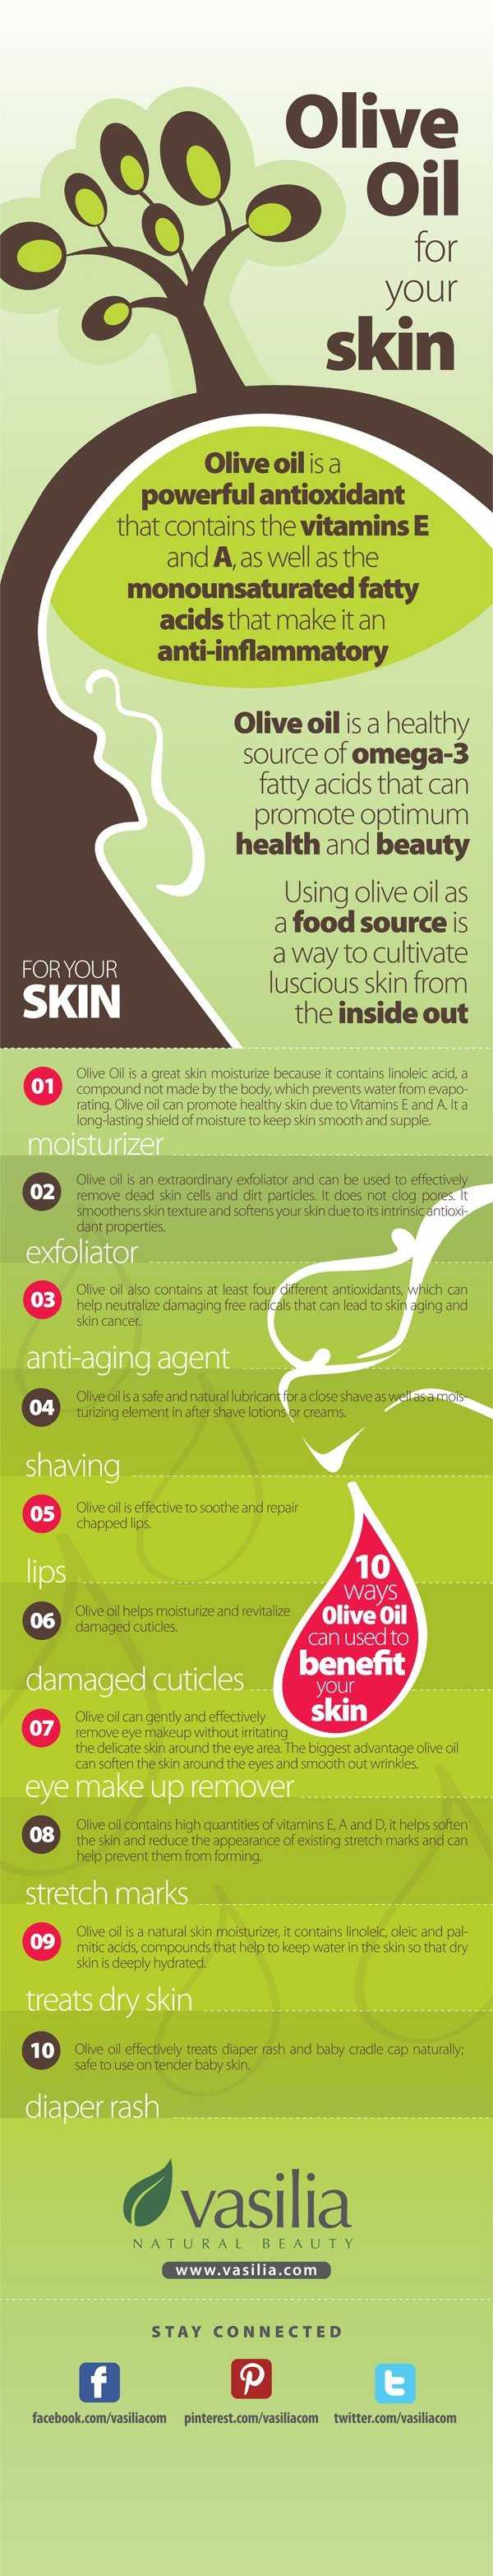 The Benefits Of Olive Oil For Skin